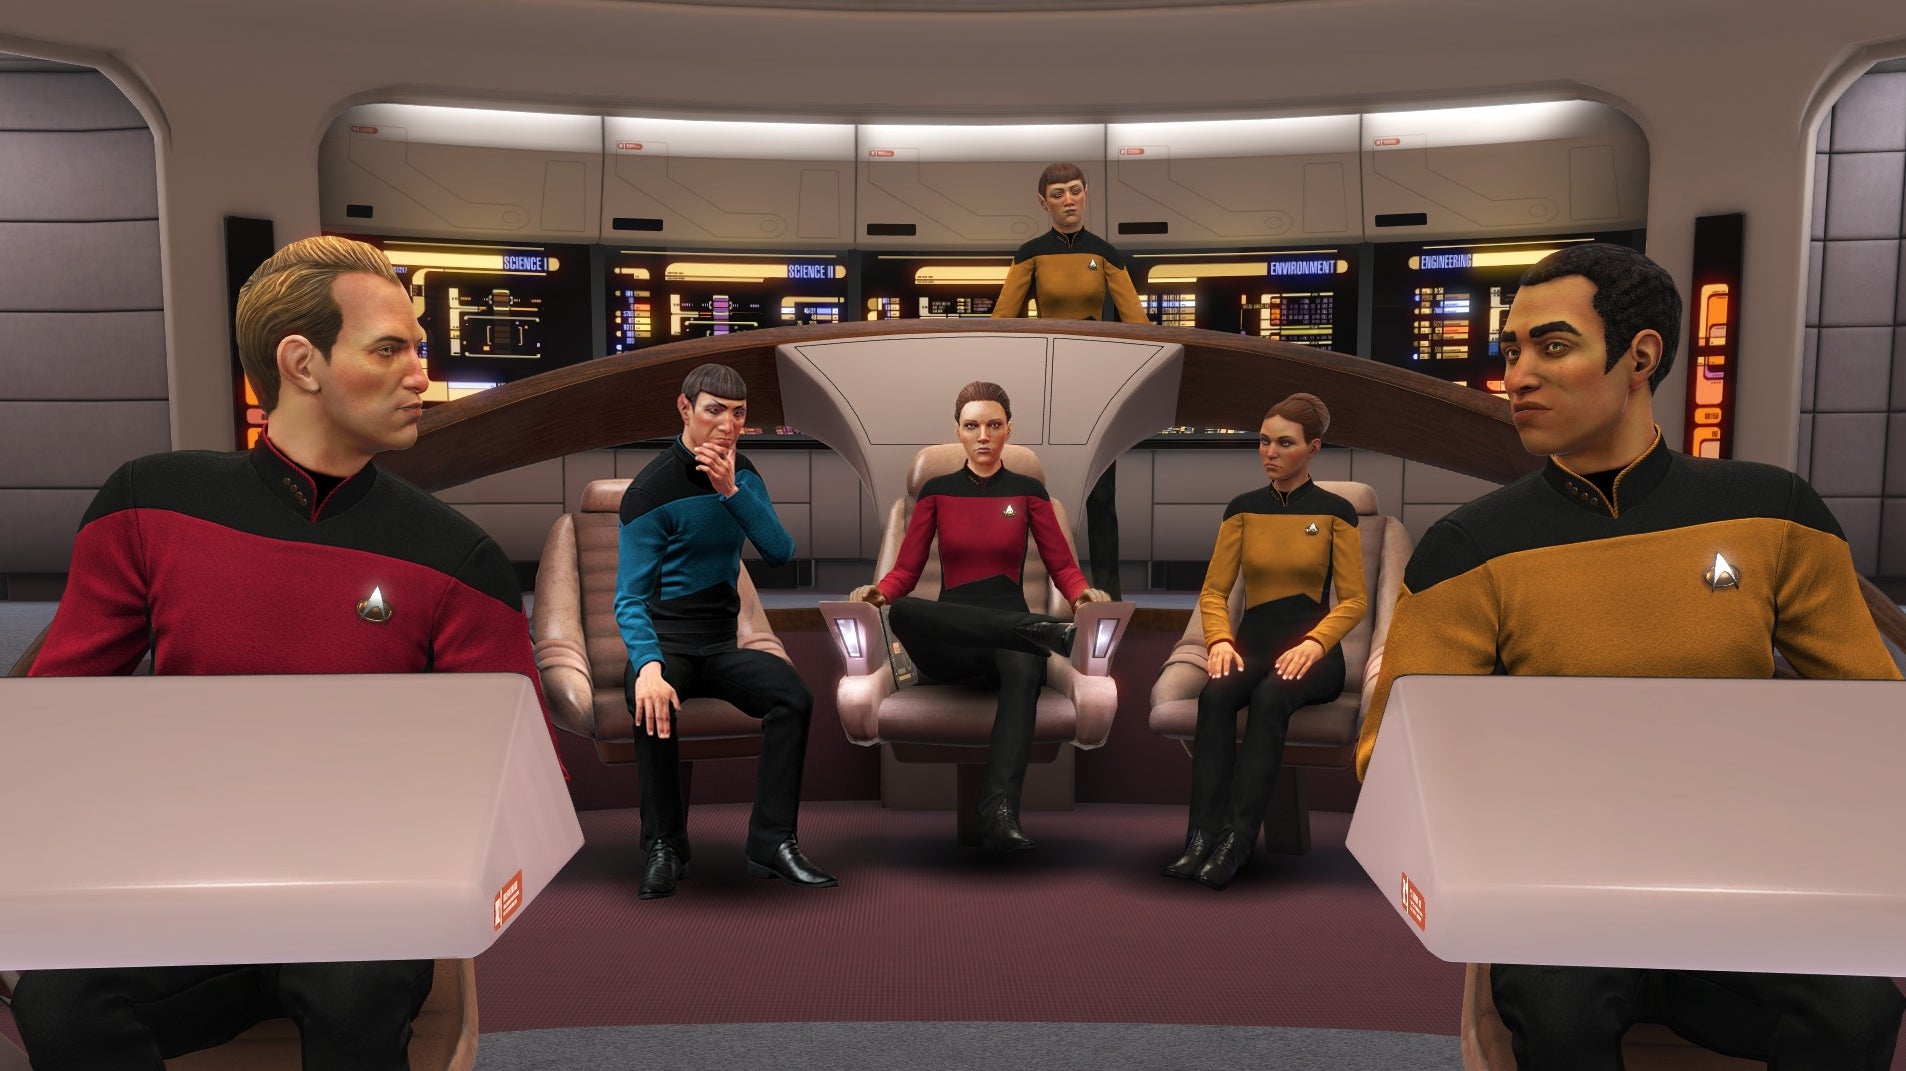 Image for Ubisoft's VR Star Trek game is getting a Next Generation themed expansion